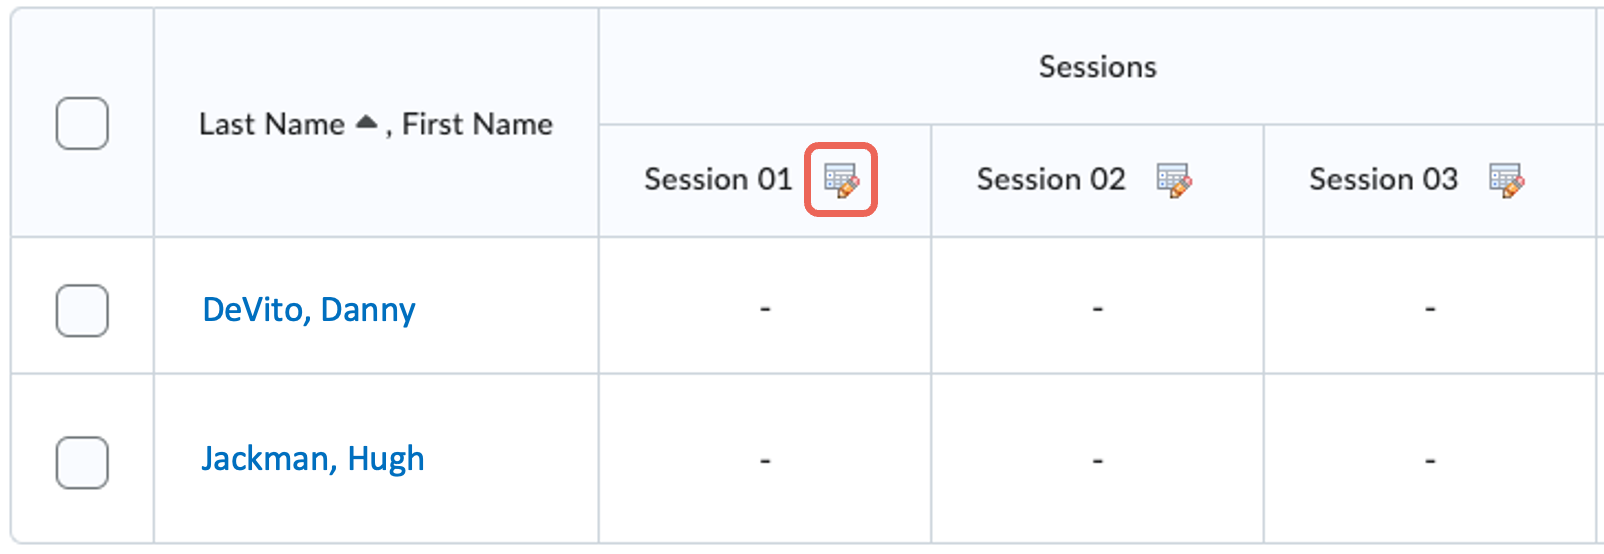 select a session to enter attendance data